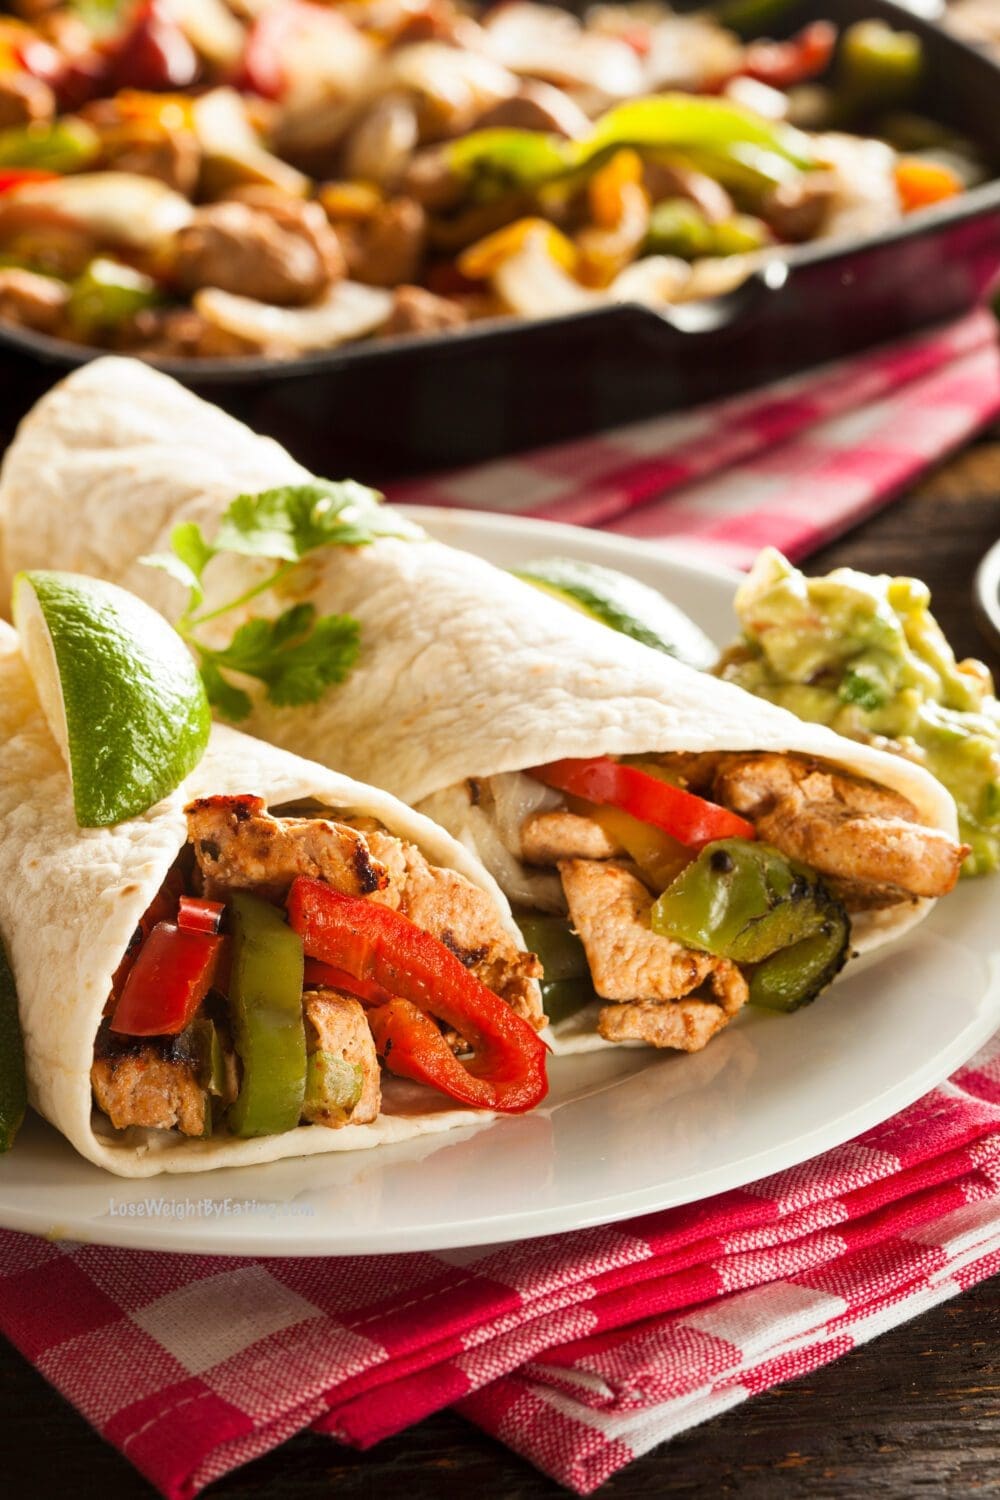 Low Calorie High Protein Chicken Wraps